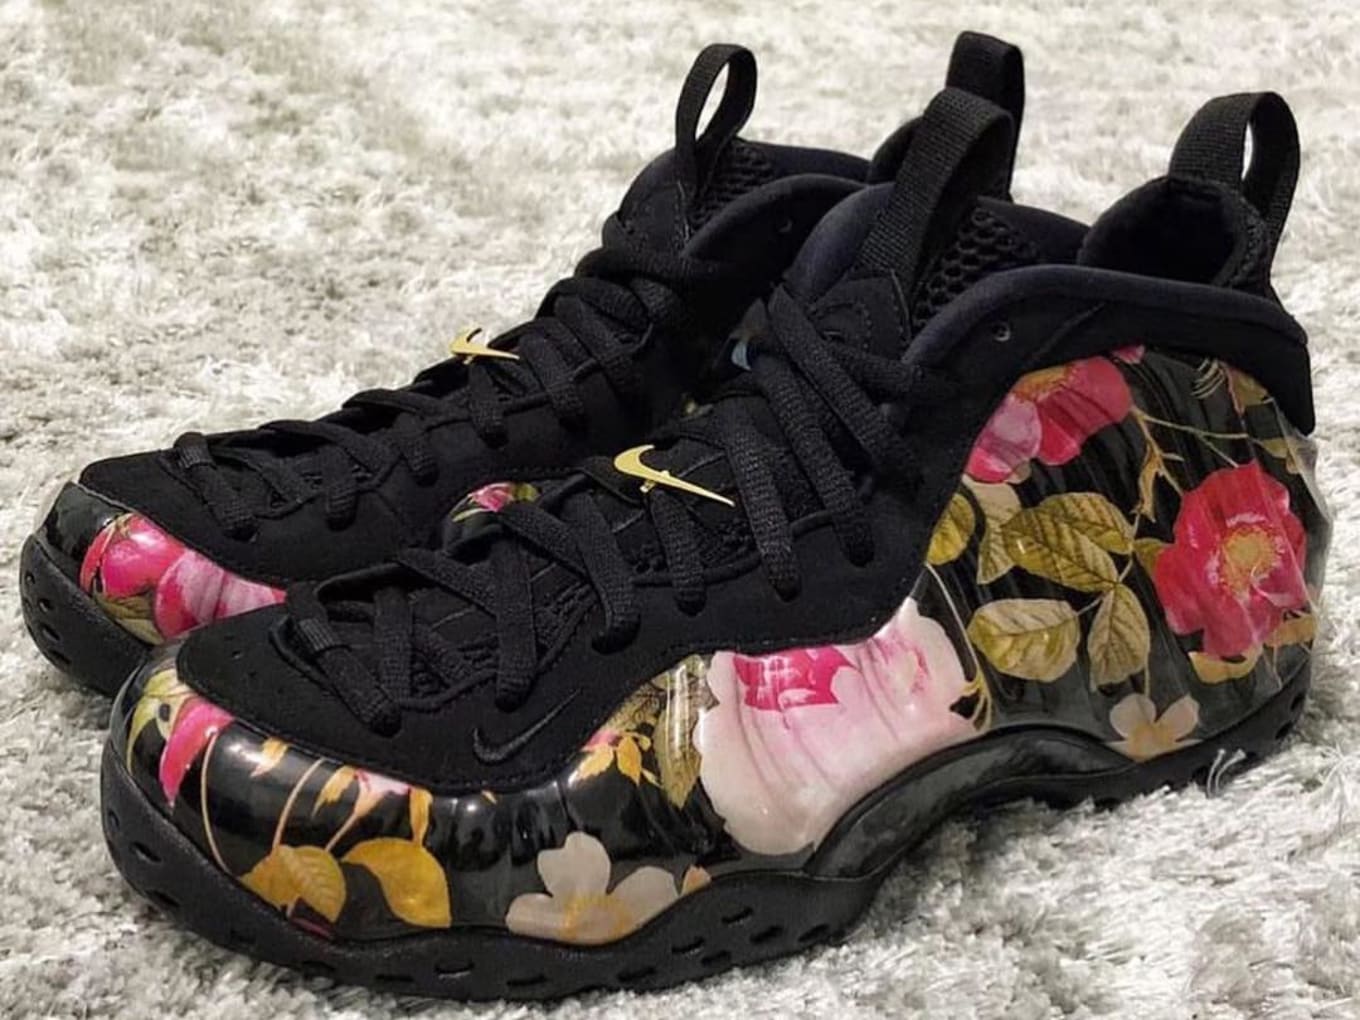 Meaningless tight Rejoice Nike Air Foamposite One 'Floral' Release Date | Sole Collector